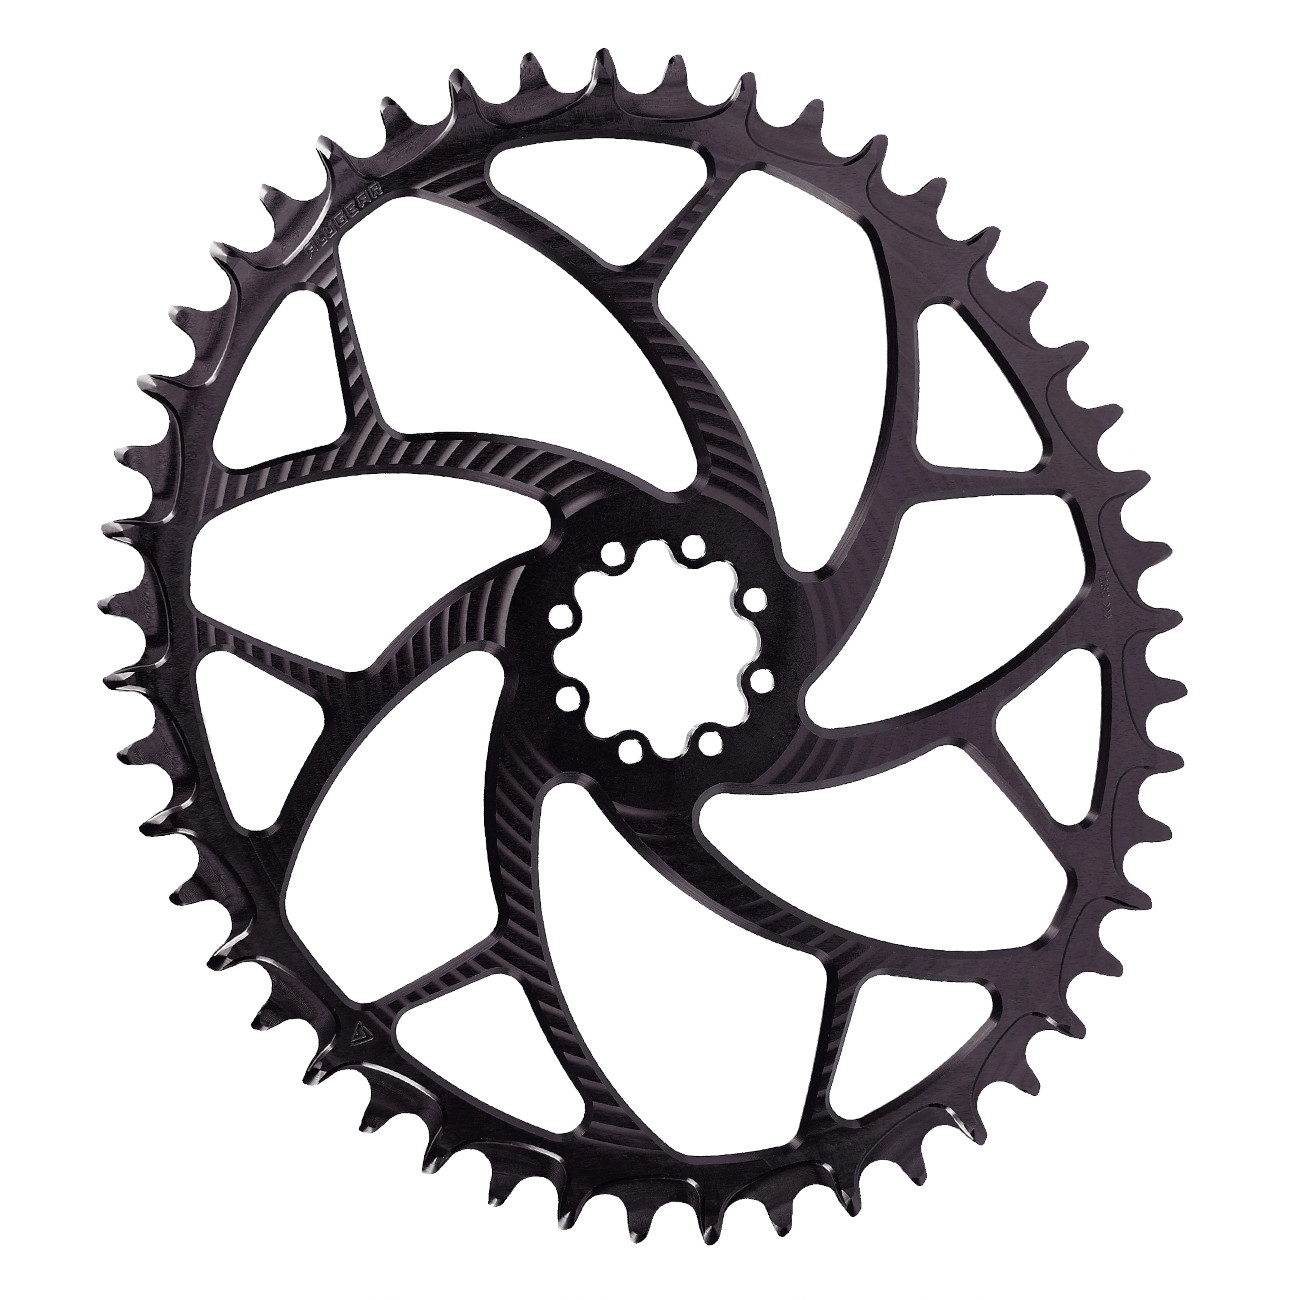 Picture of Alugear ELM Narrow Wide Road / Gravel Chainring - Oval - for 1x SRAM 8-Bolt Direct Mount